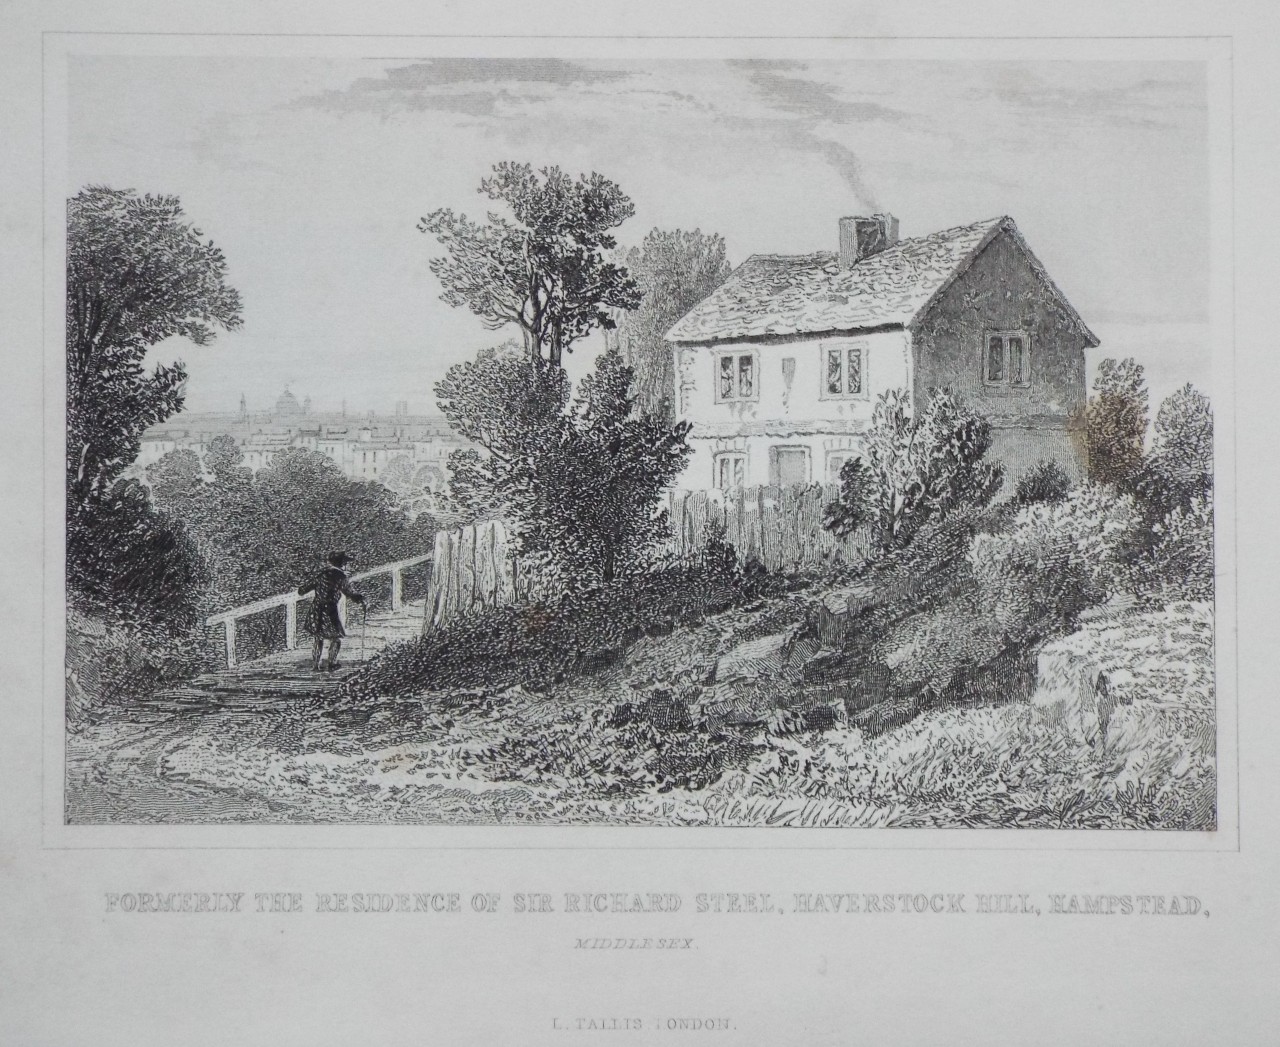 Print - Formerly the Residence of Richard Steel, Haverstock Hill, Hampstead, Middlesex.